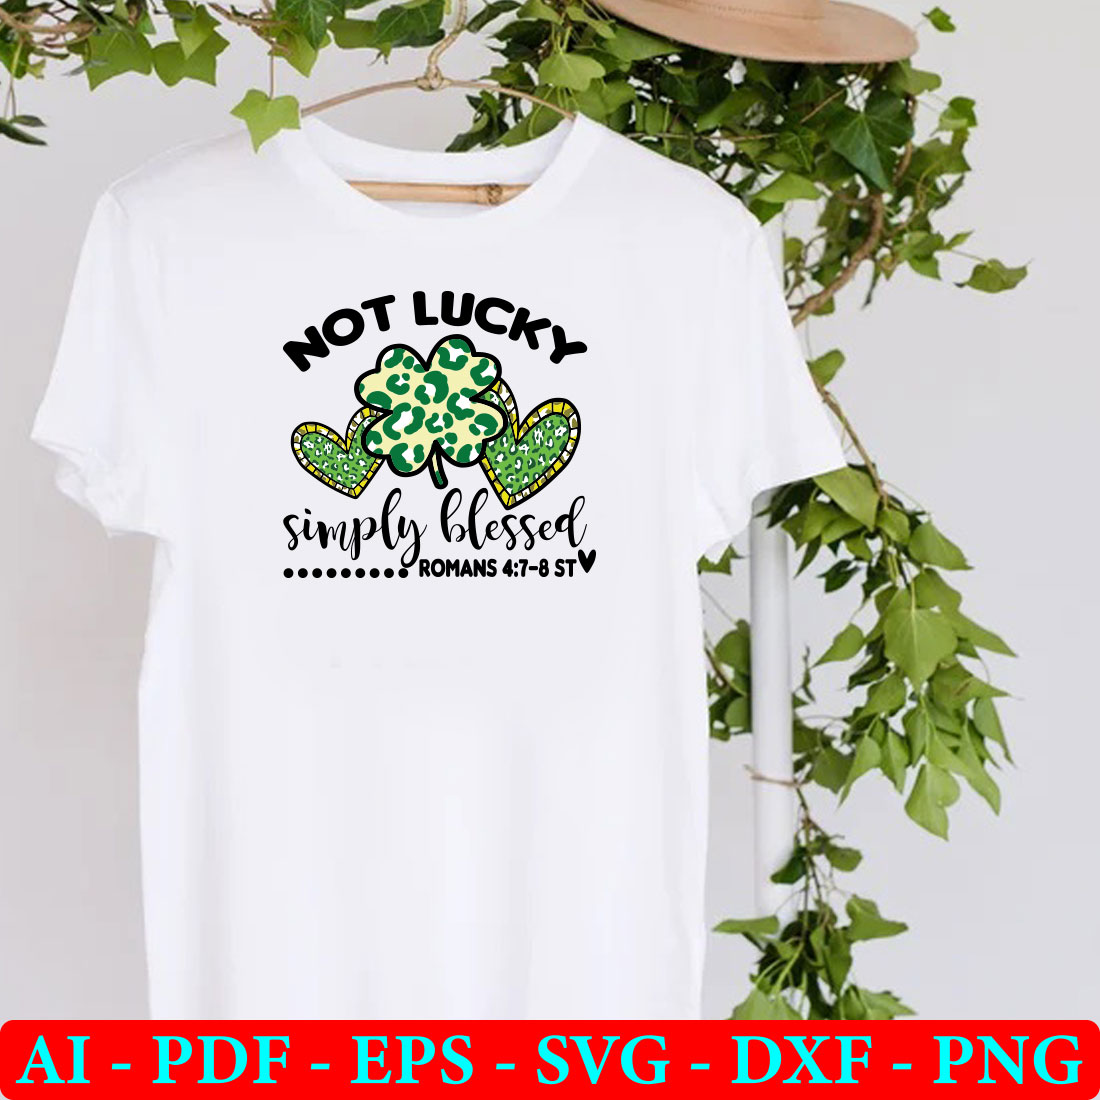 White t - shirt with a green turtle on it.